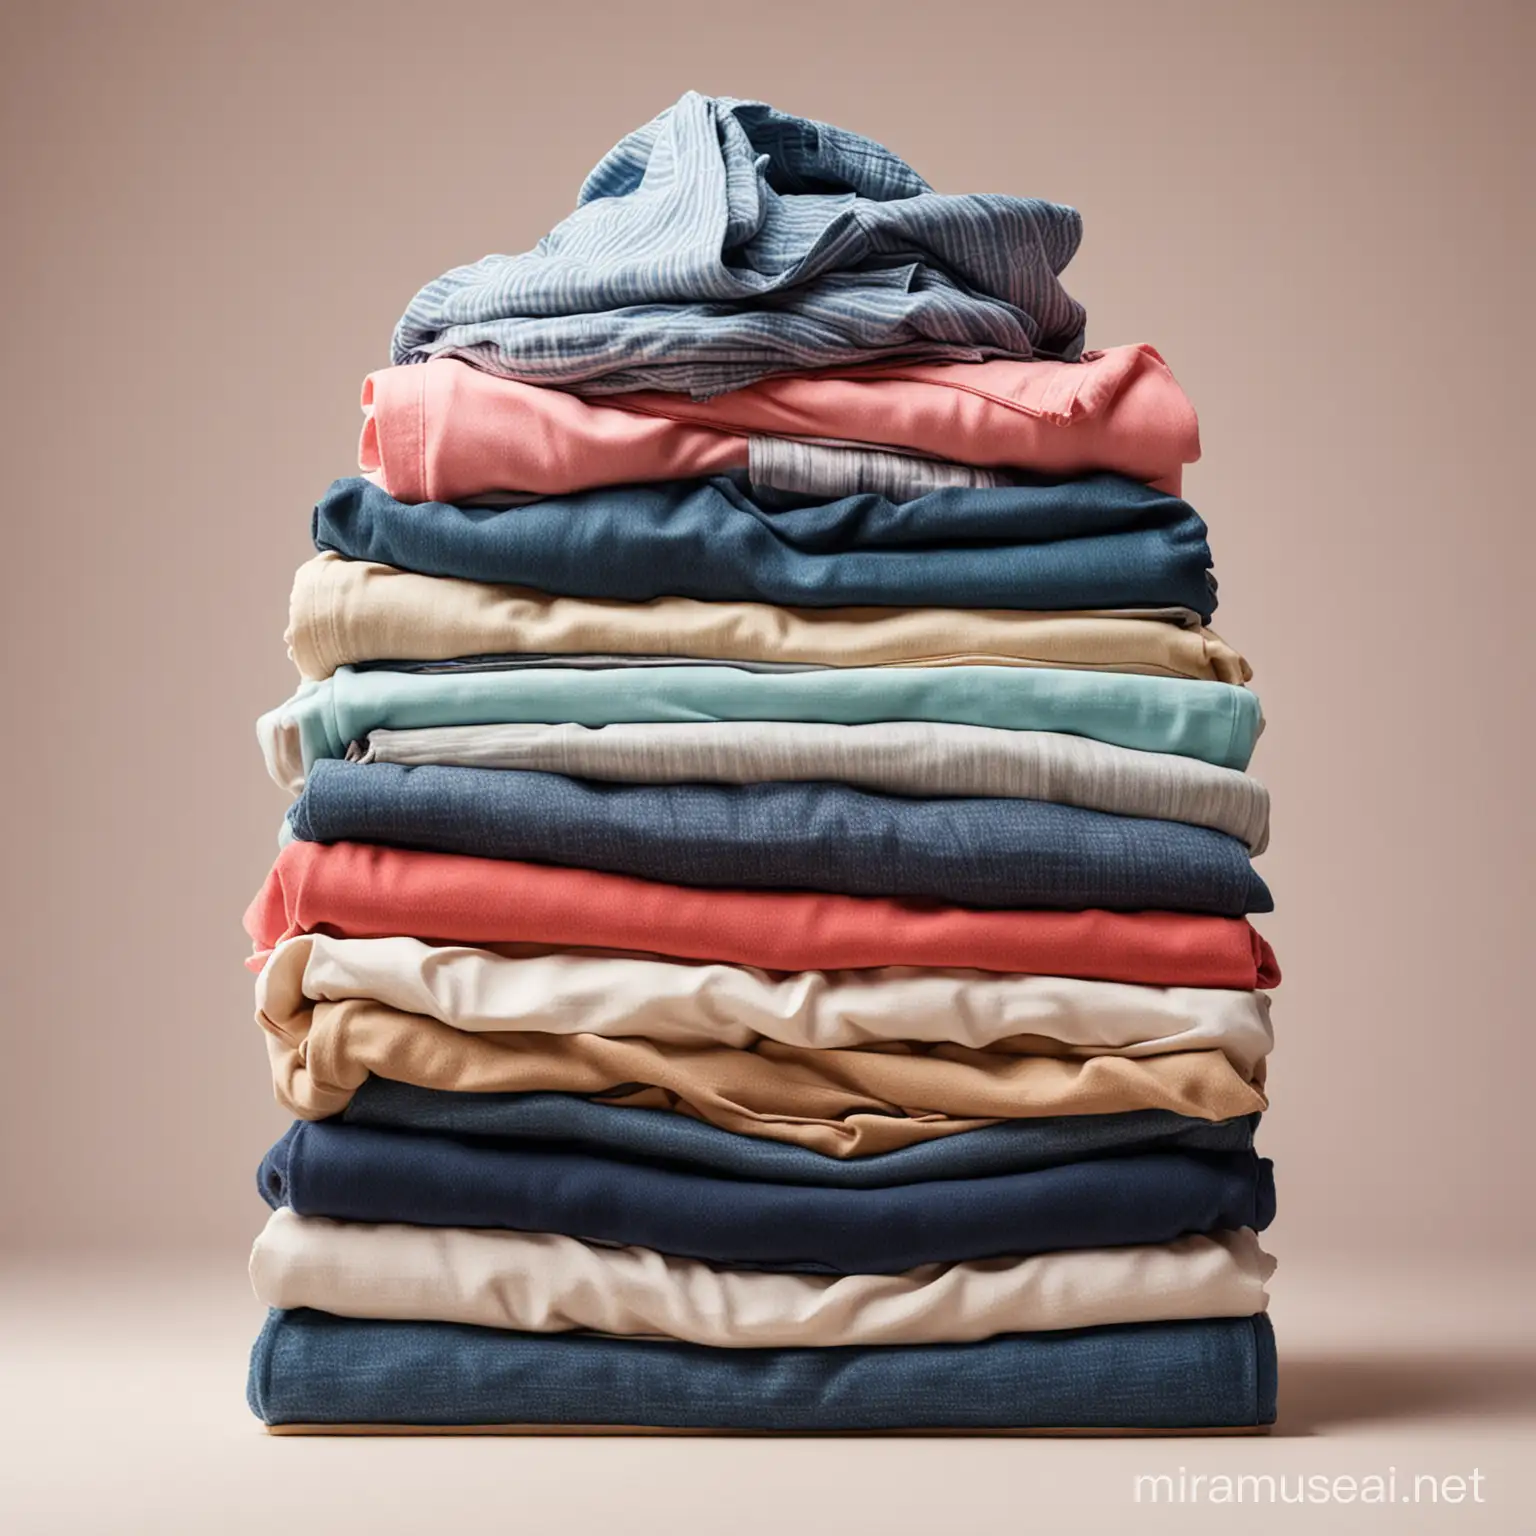 A few pile of clothes stacked on top of each other on an isolated background.